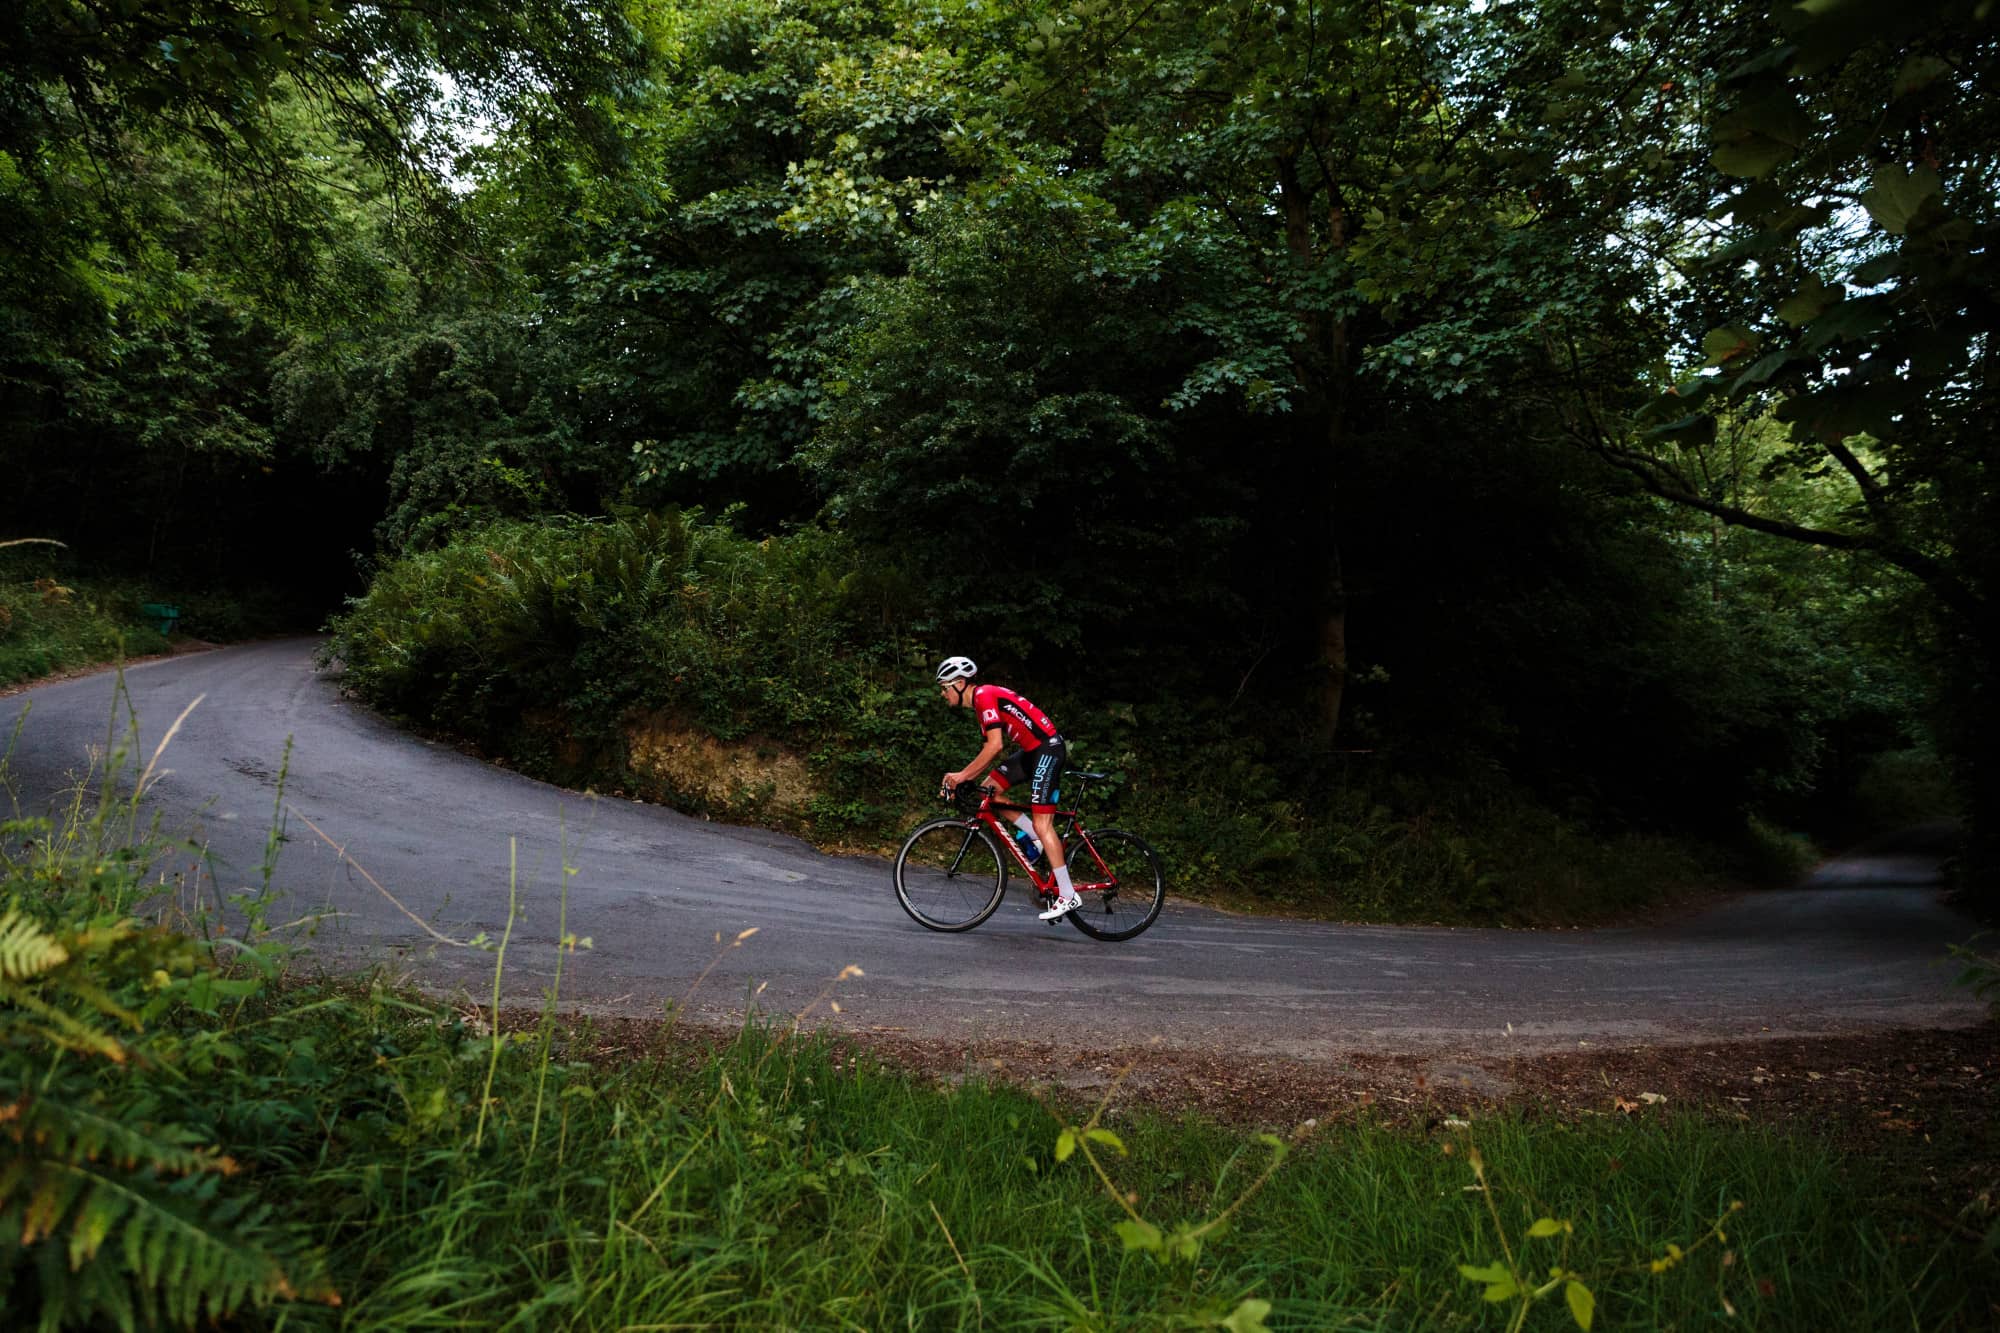 Cyclist riding uphill. Photo by Chris Kendall on Unsplash